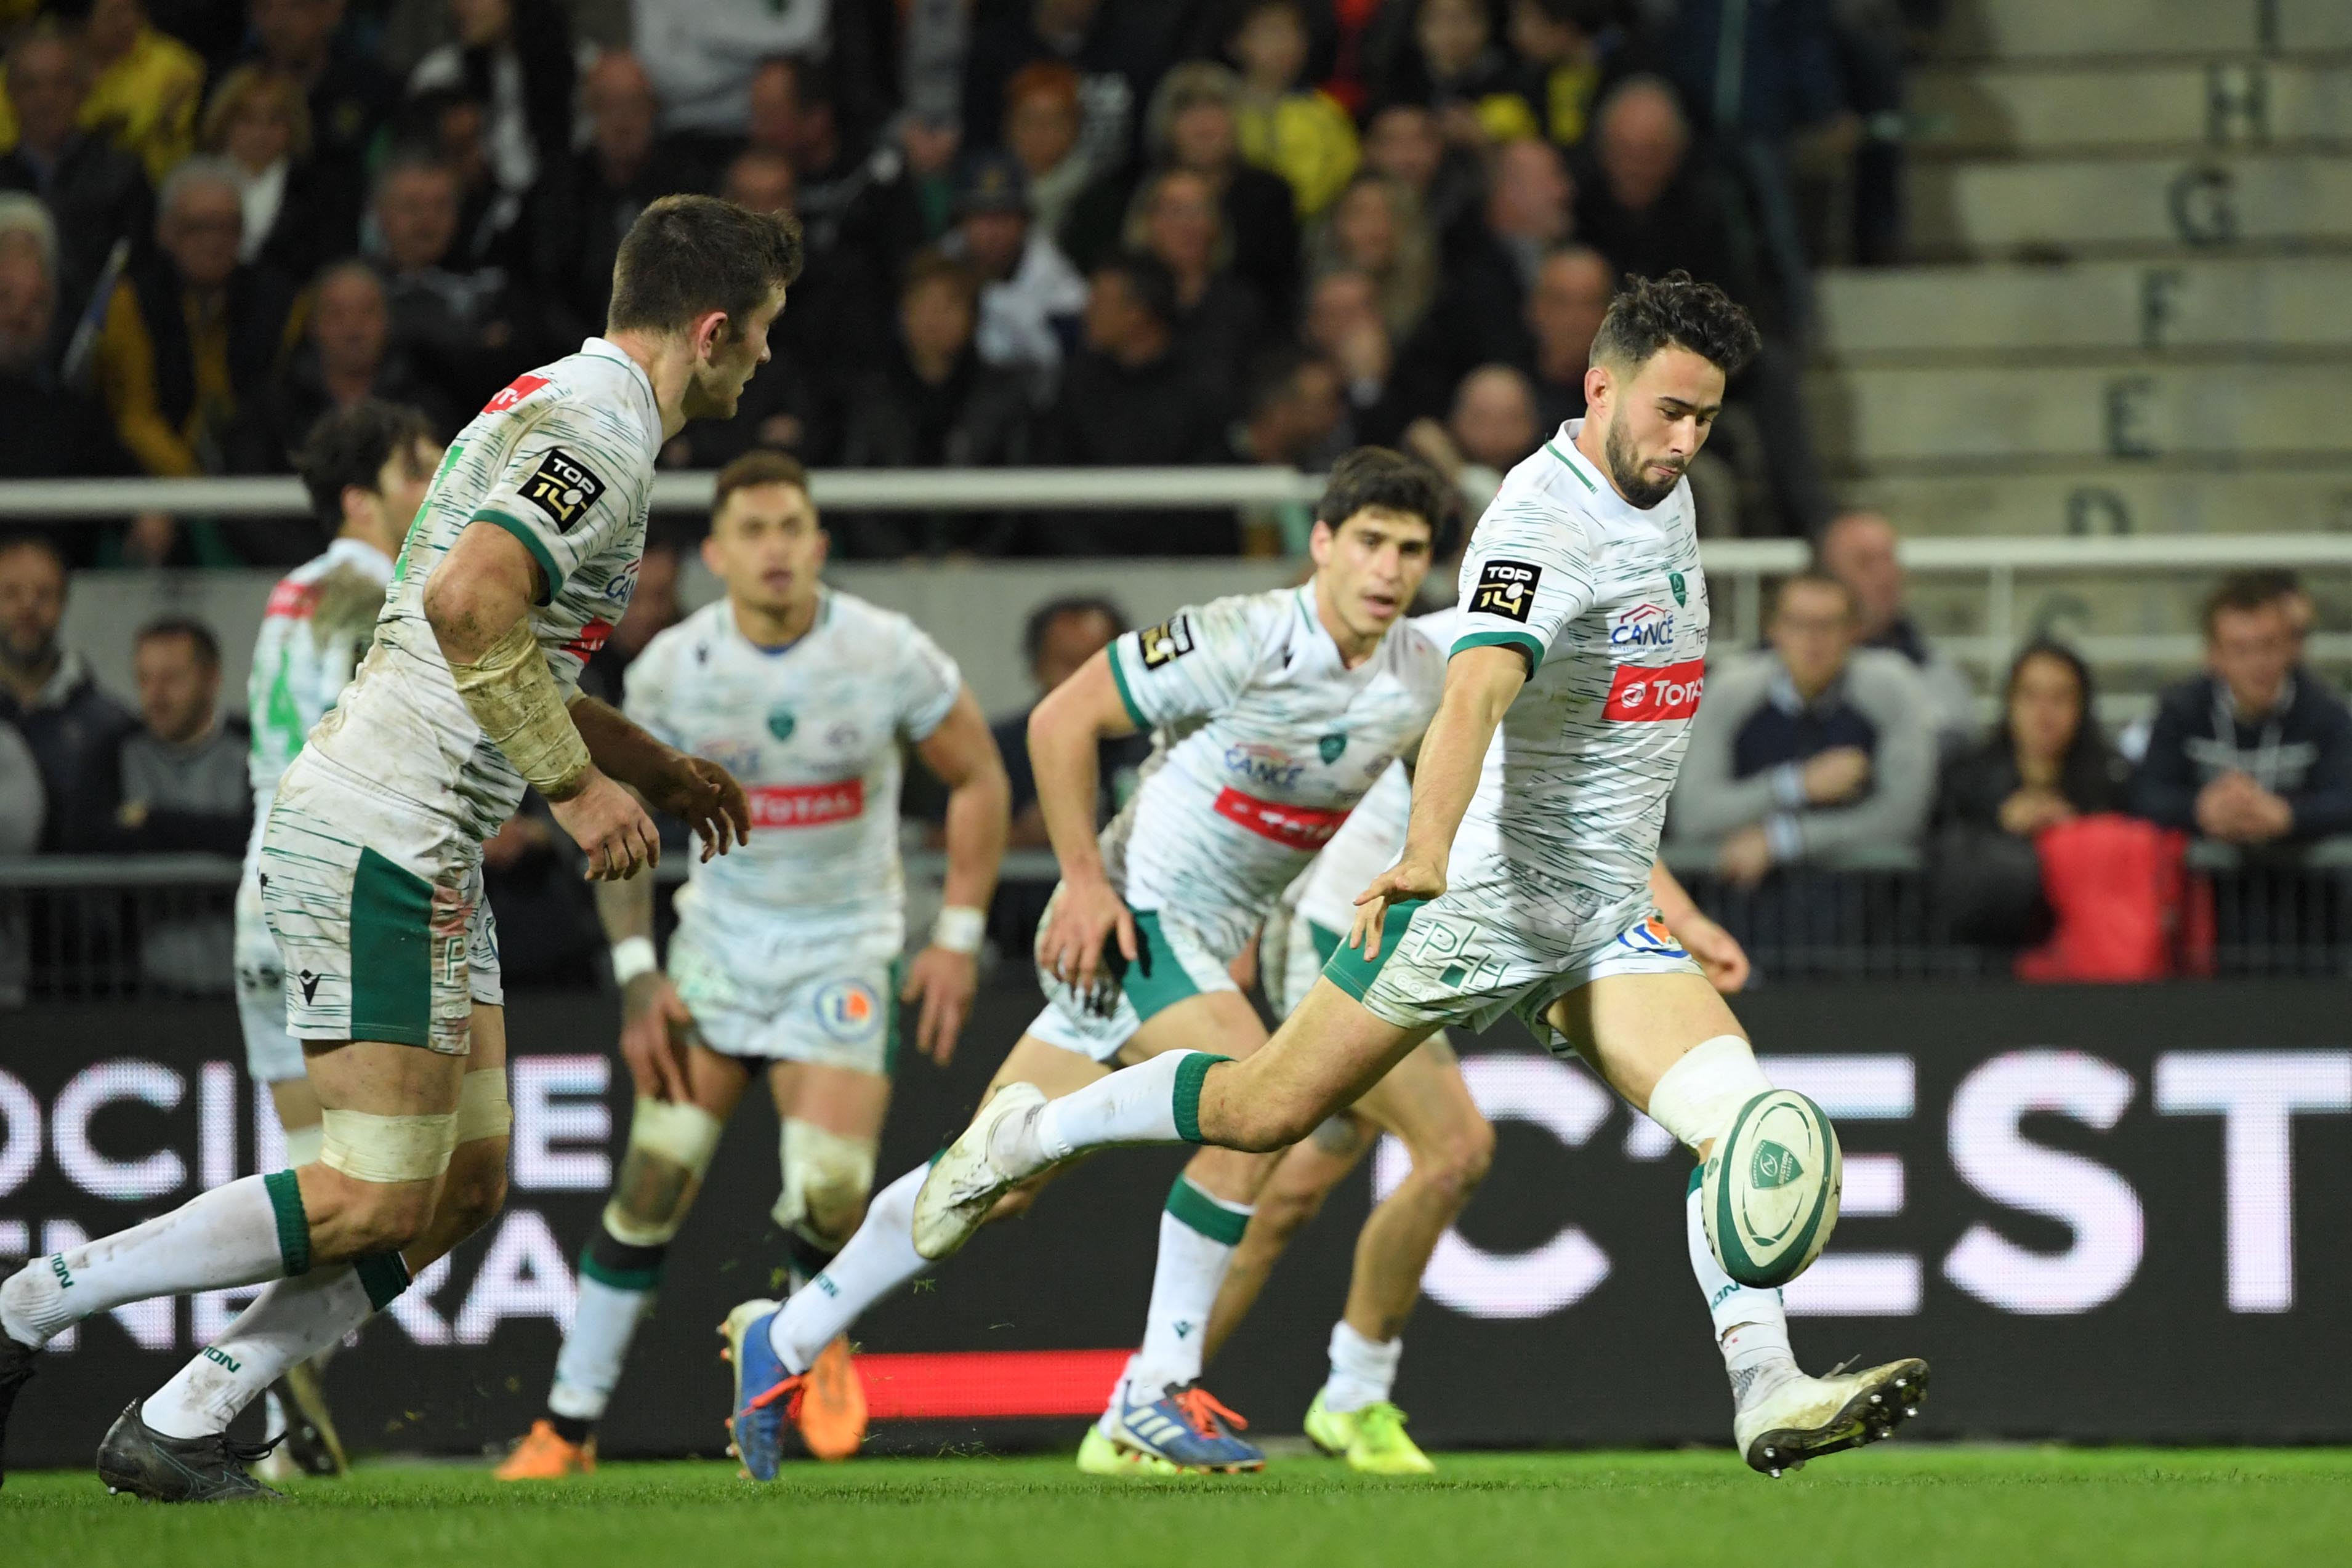 TOP 14 | SECTION PALOISE - MONTPELLIER HERAULT RUGBY : 19-15